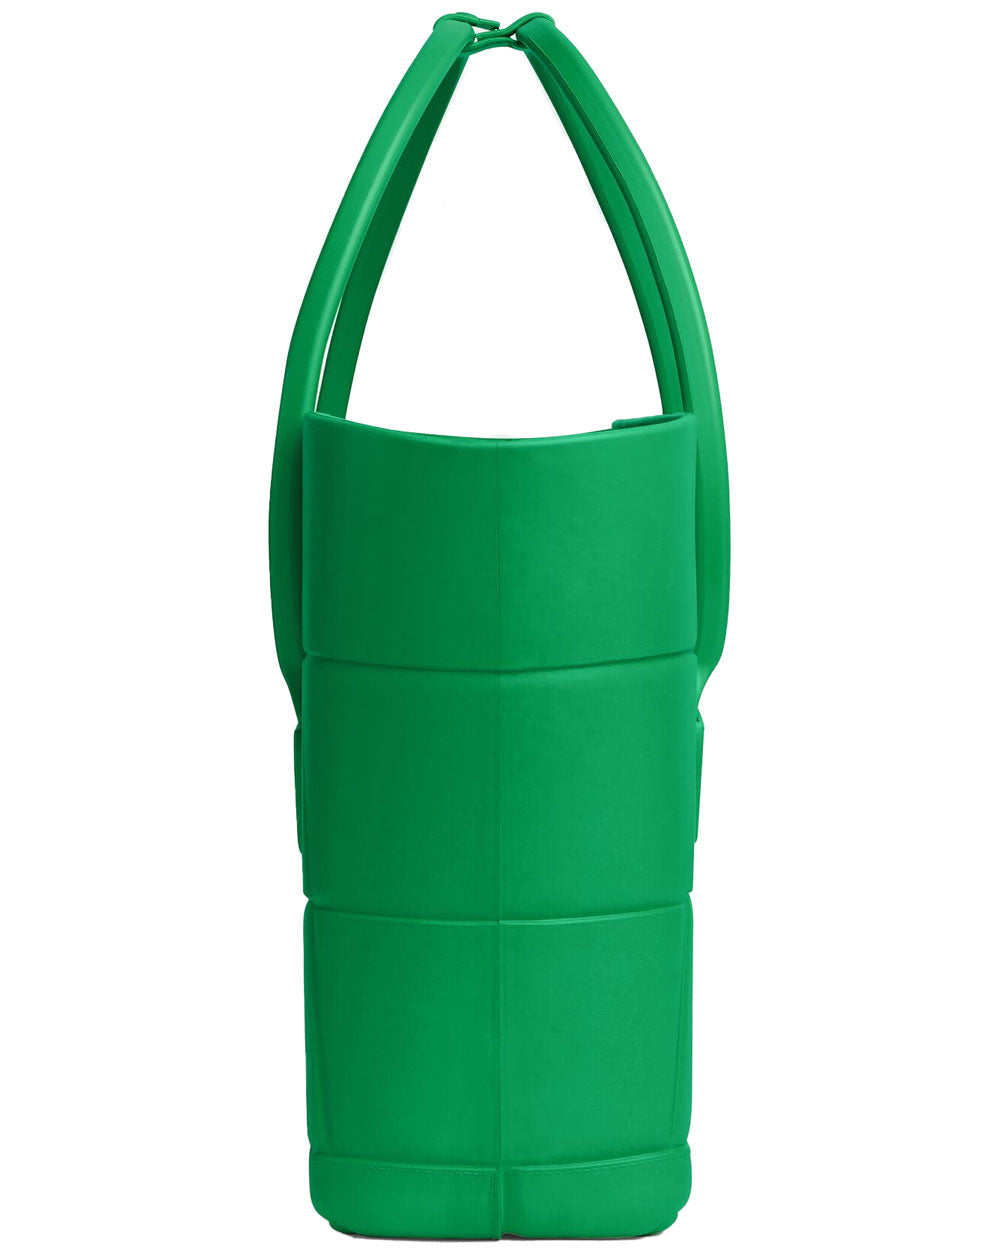 Large Arco Rubber Tote in Grass